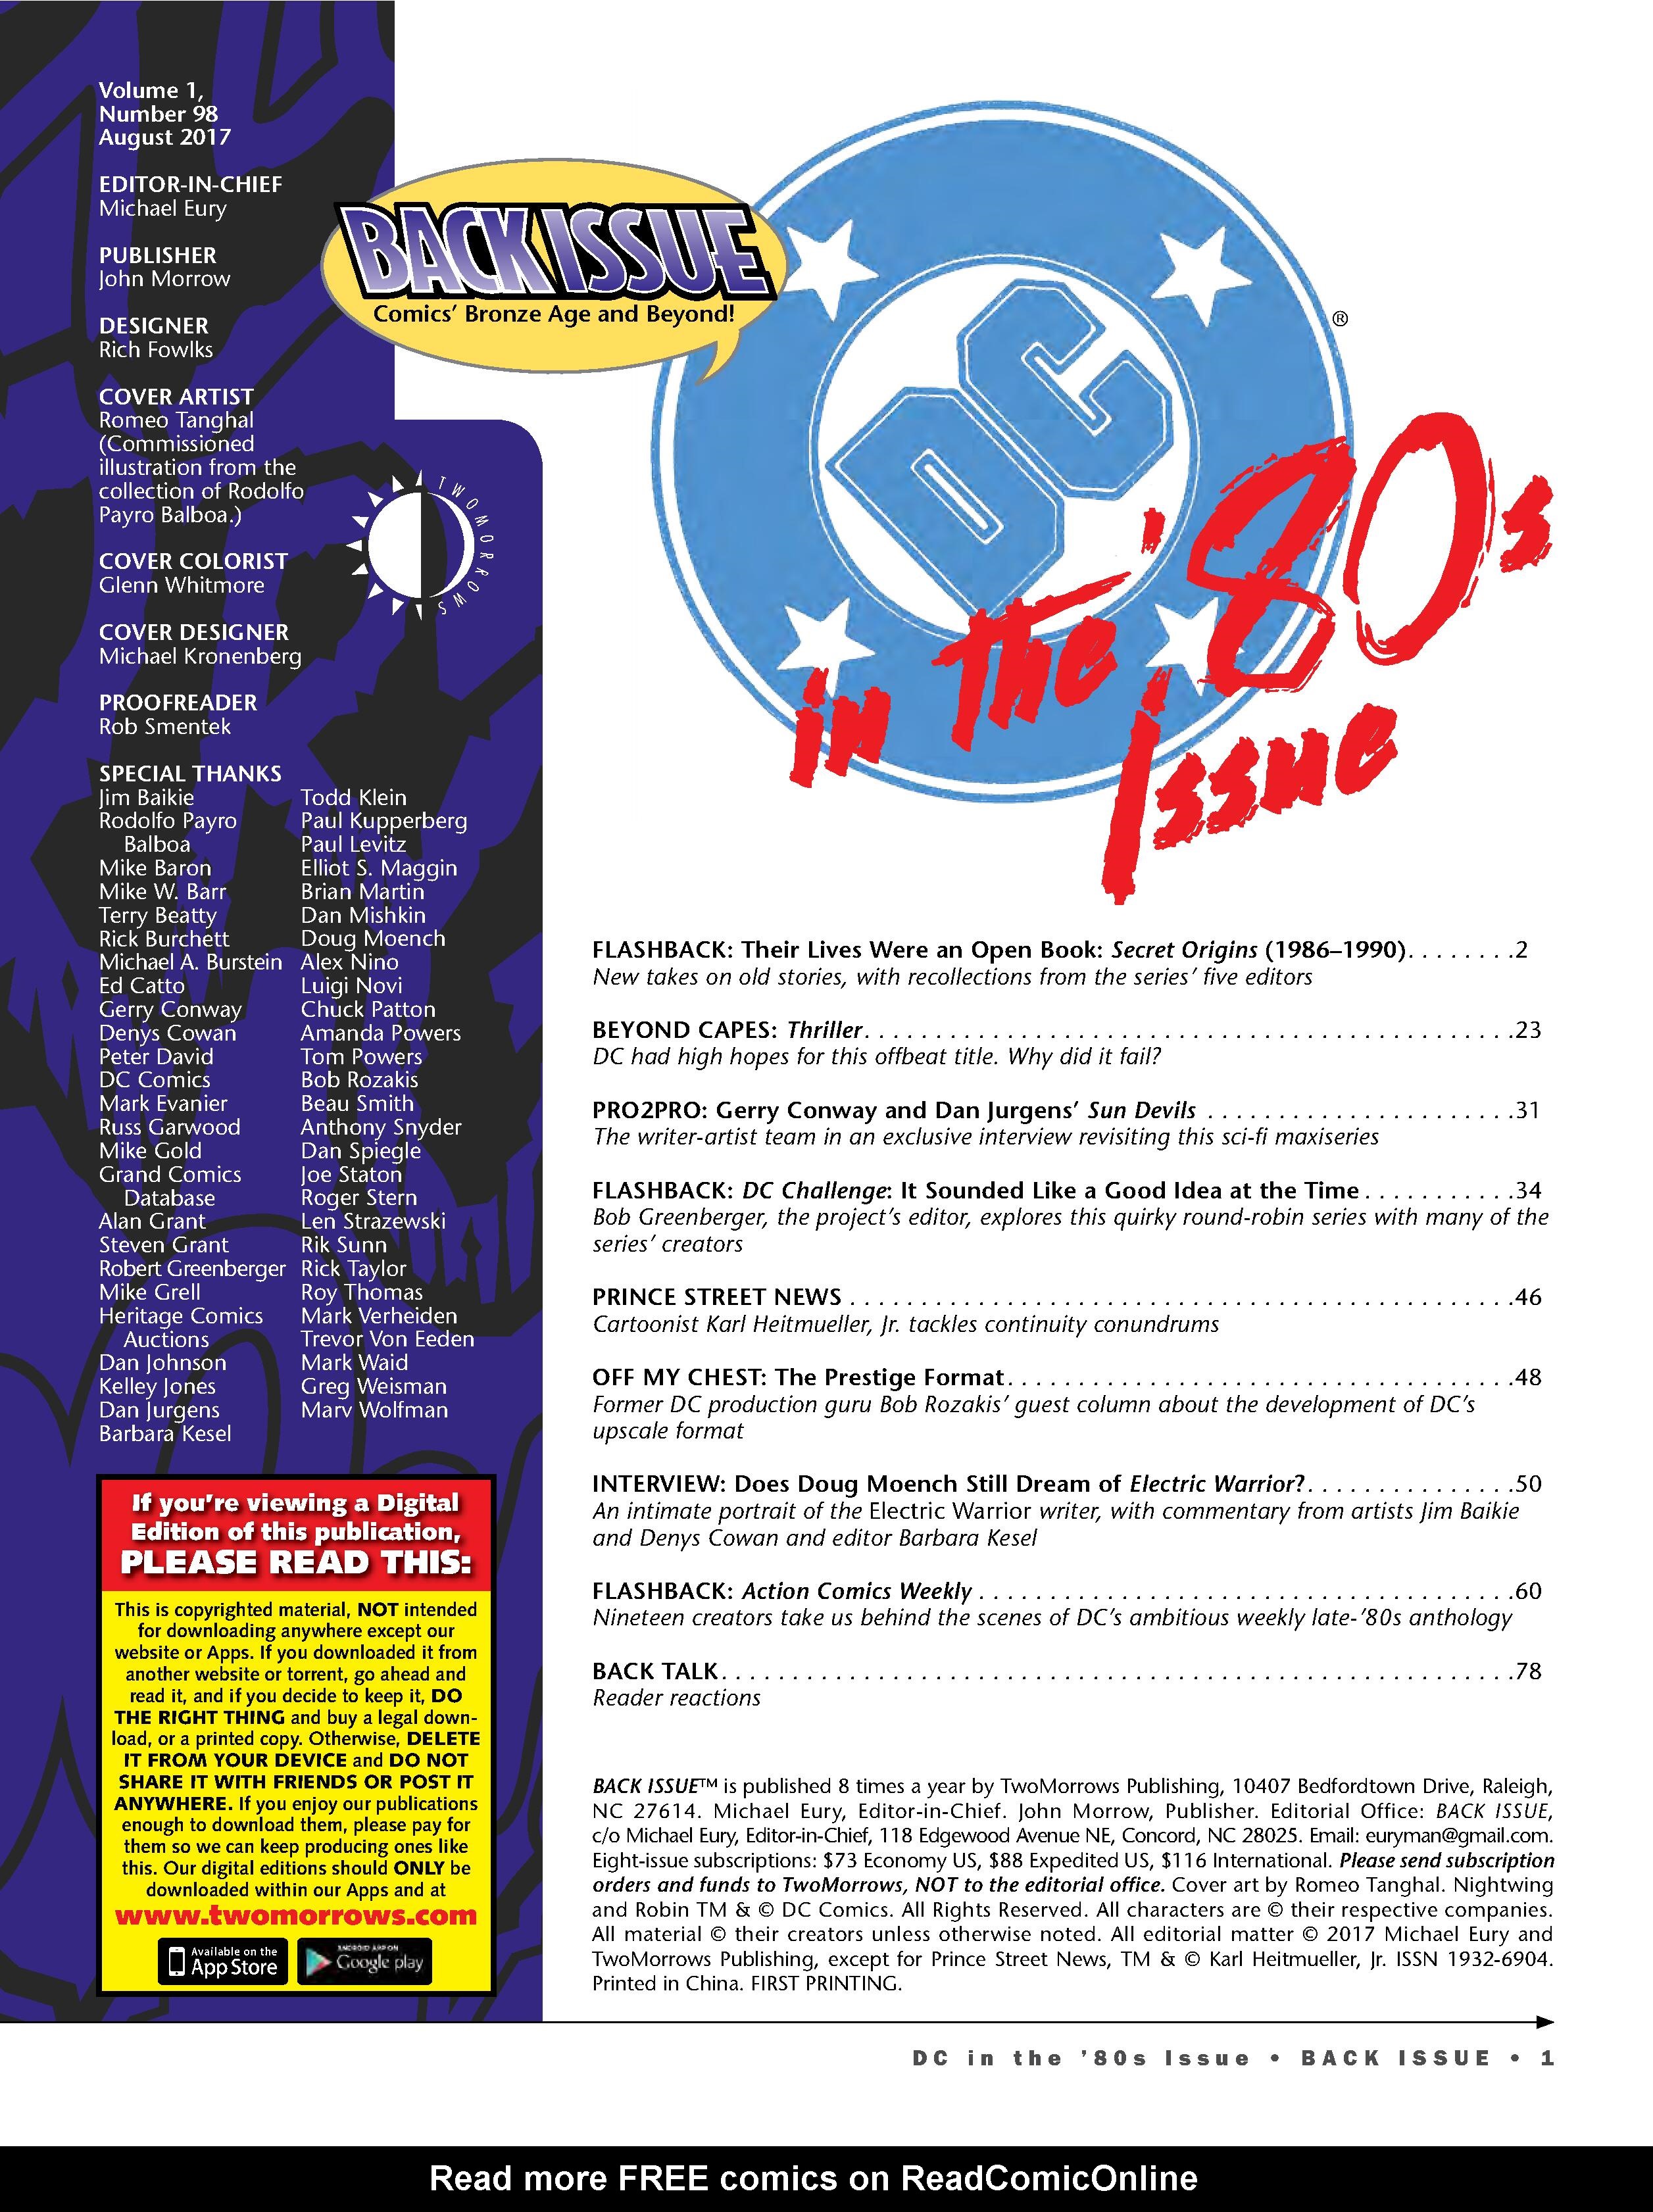 Read online Back Issue comic -  Issue #98 - 3